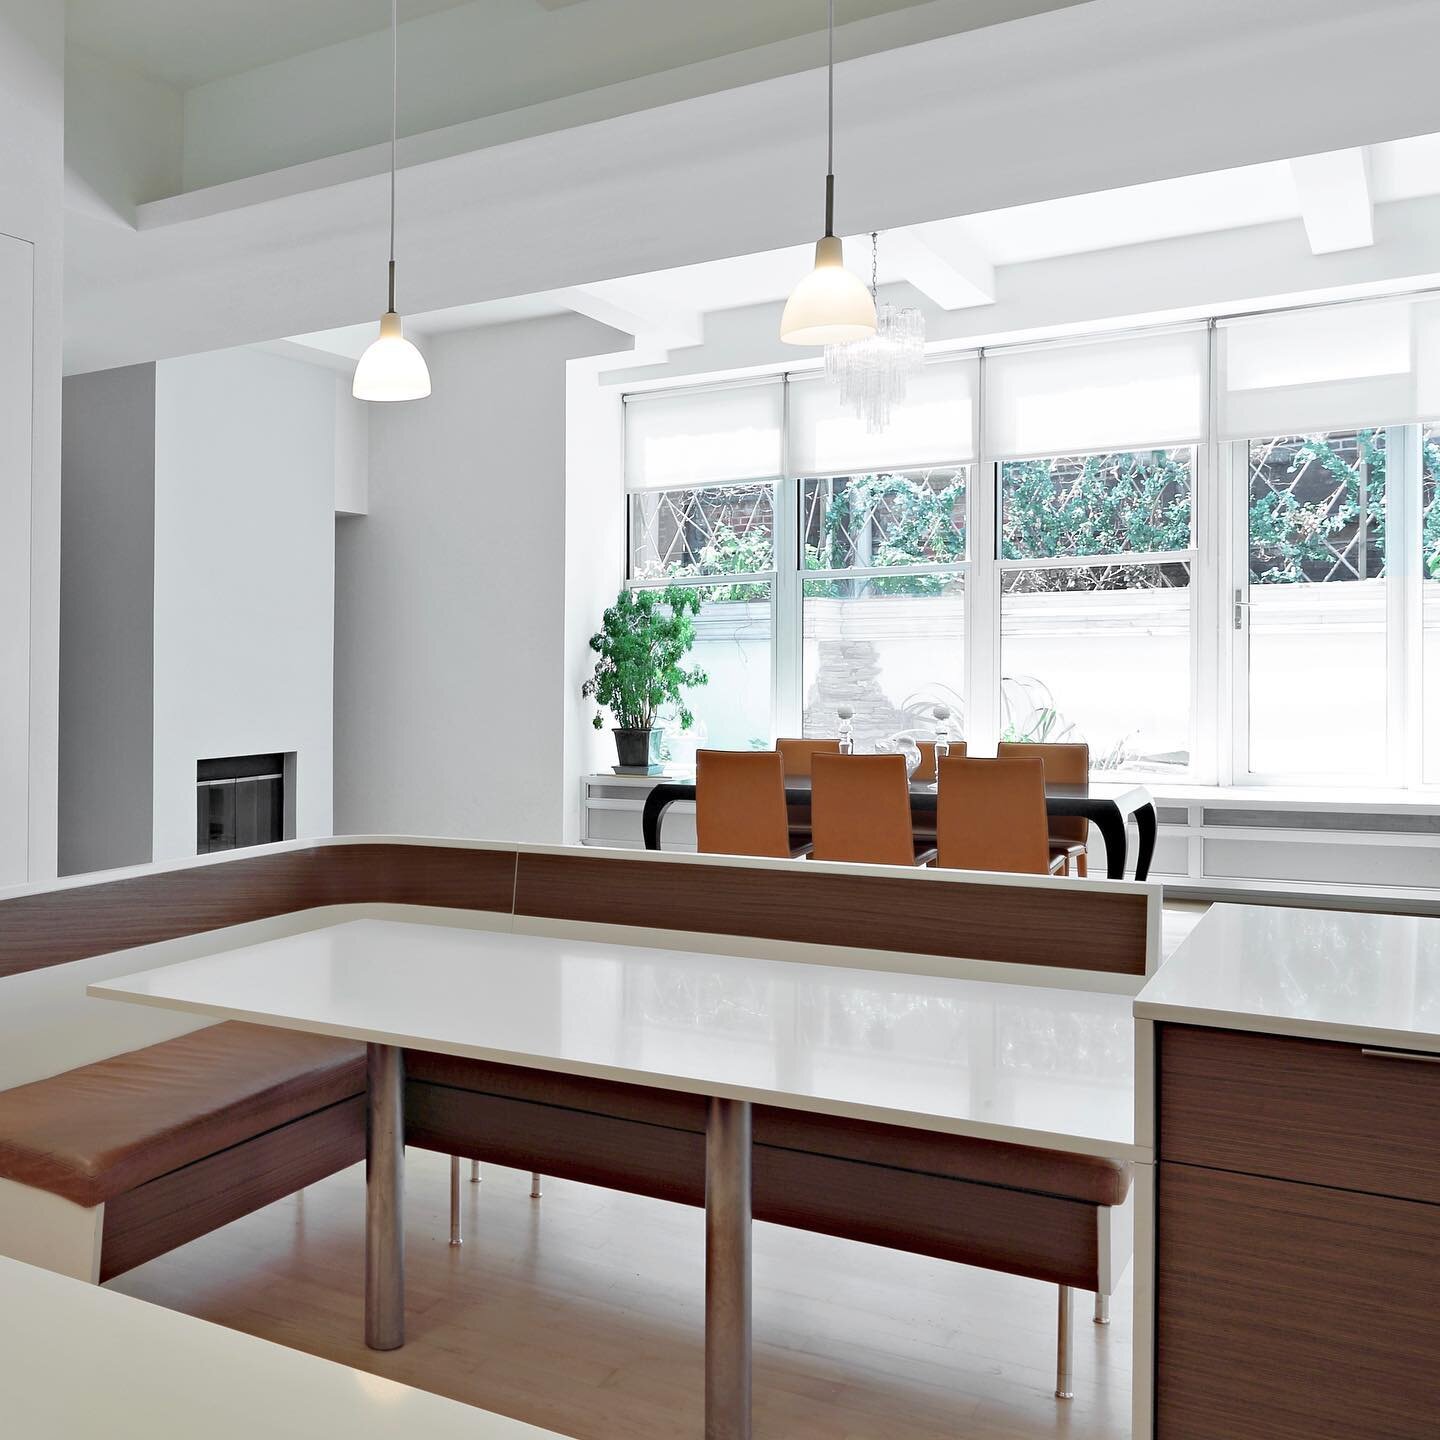 A banquette integrated into kitchen millwork. Tribeca loft renovation.